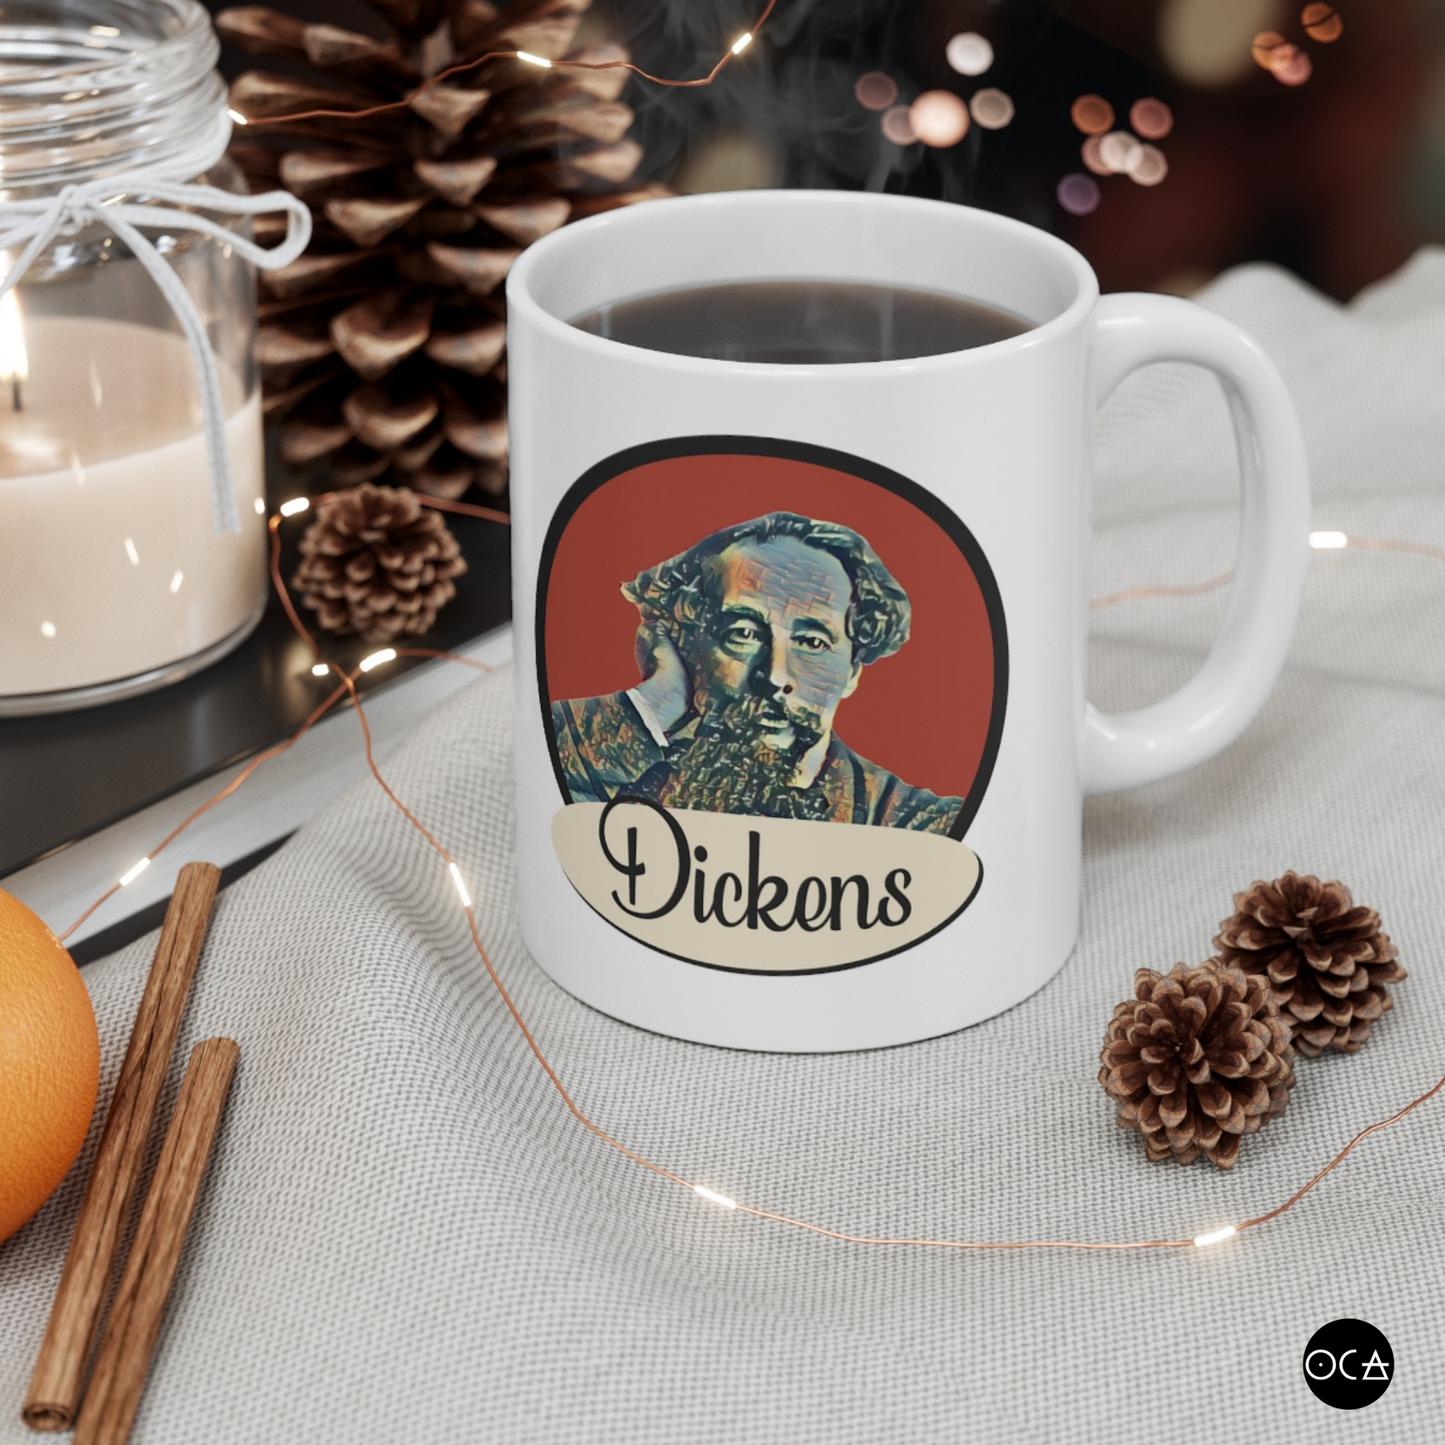 Charles Dickens Mug (Doublesided/2 Color Options)